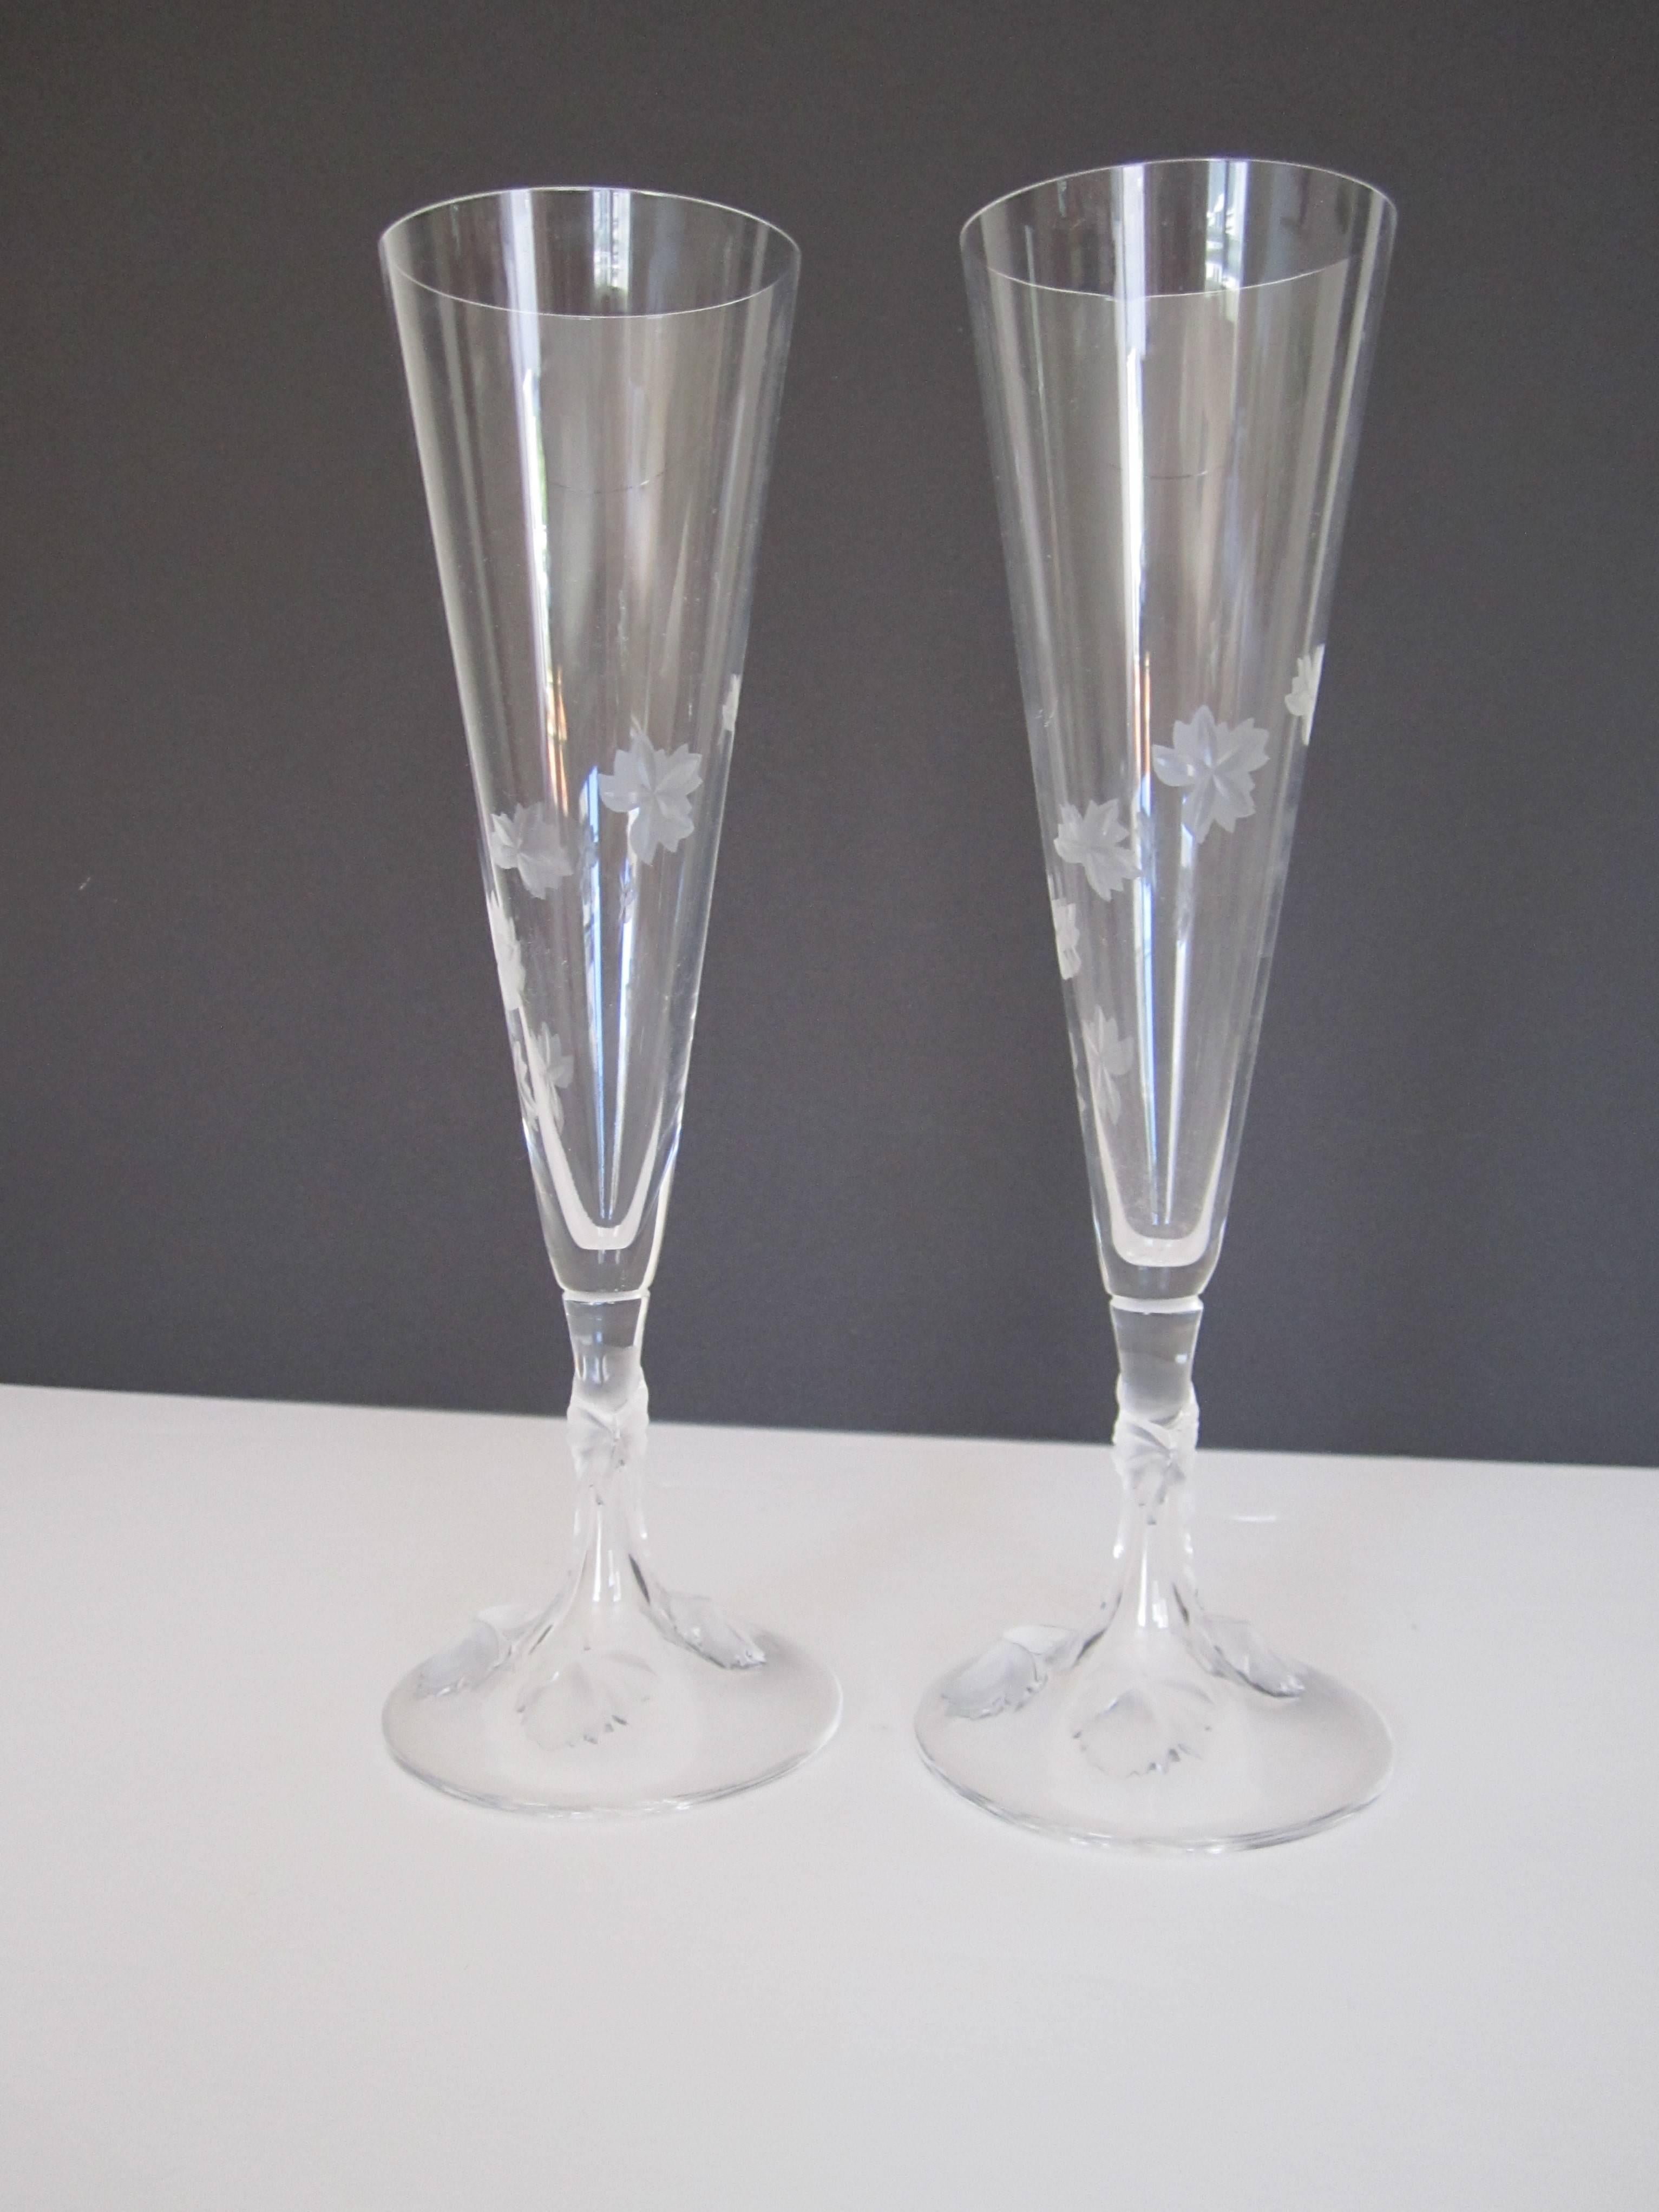 Pair/set available here for $500
A beautiful vintage pair of signed Lalique champagne flute glasses with raised decorative relief twisting up from base to stem to flute. Signed underneath on base as shown in image. Made in France. 

10 in. H

Pair